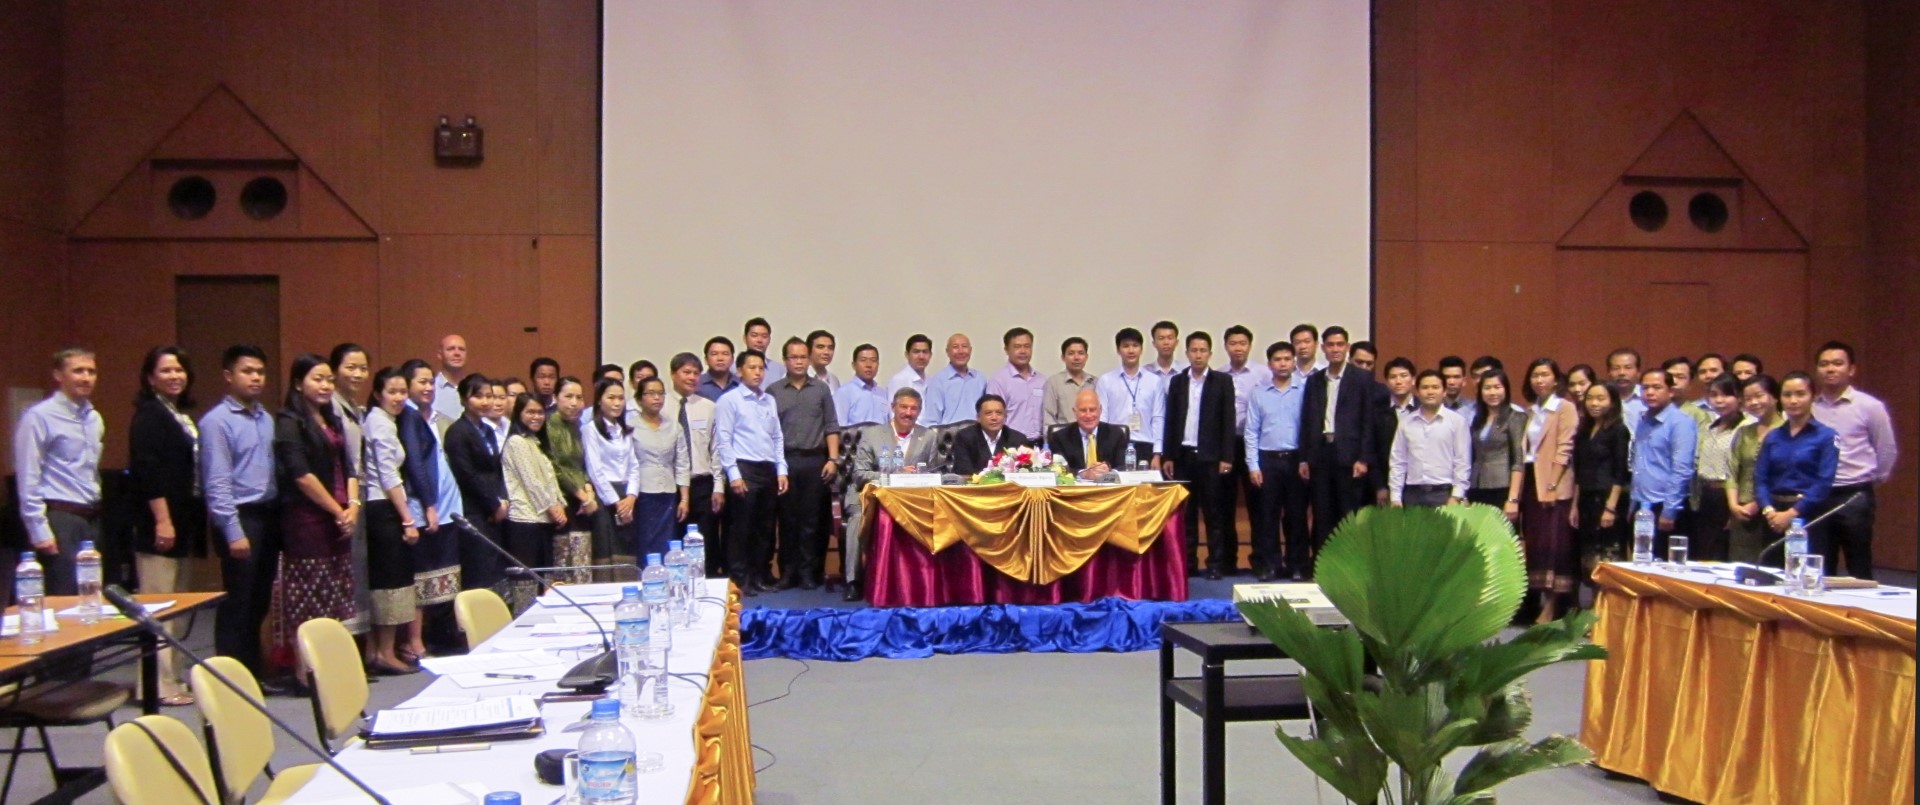 Lao PDR, APCSS join hands to prep nation for ASEAN leadership - Daniel ...